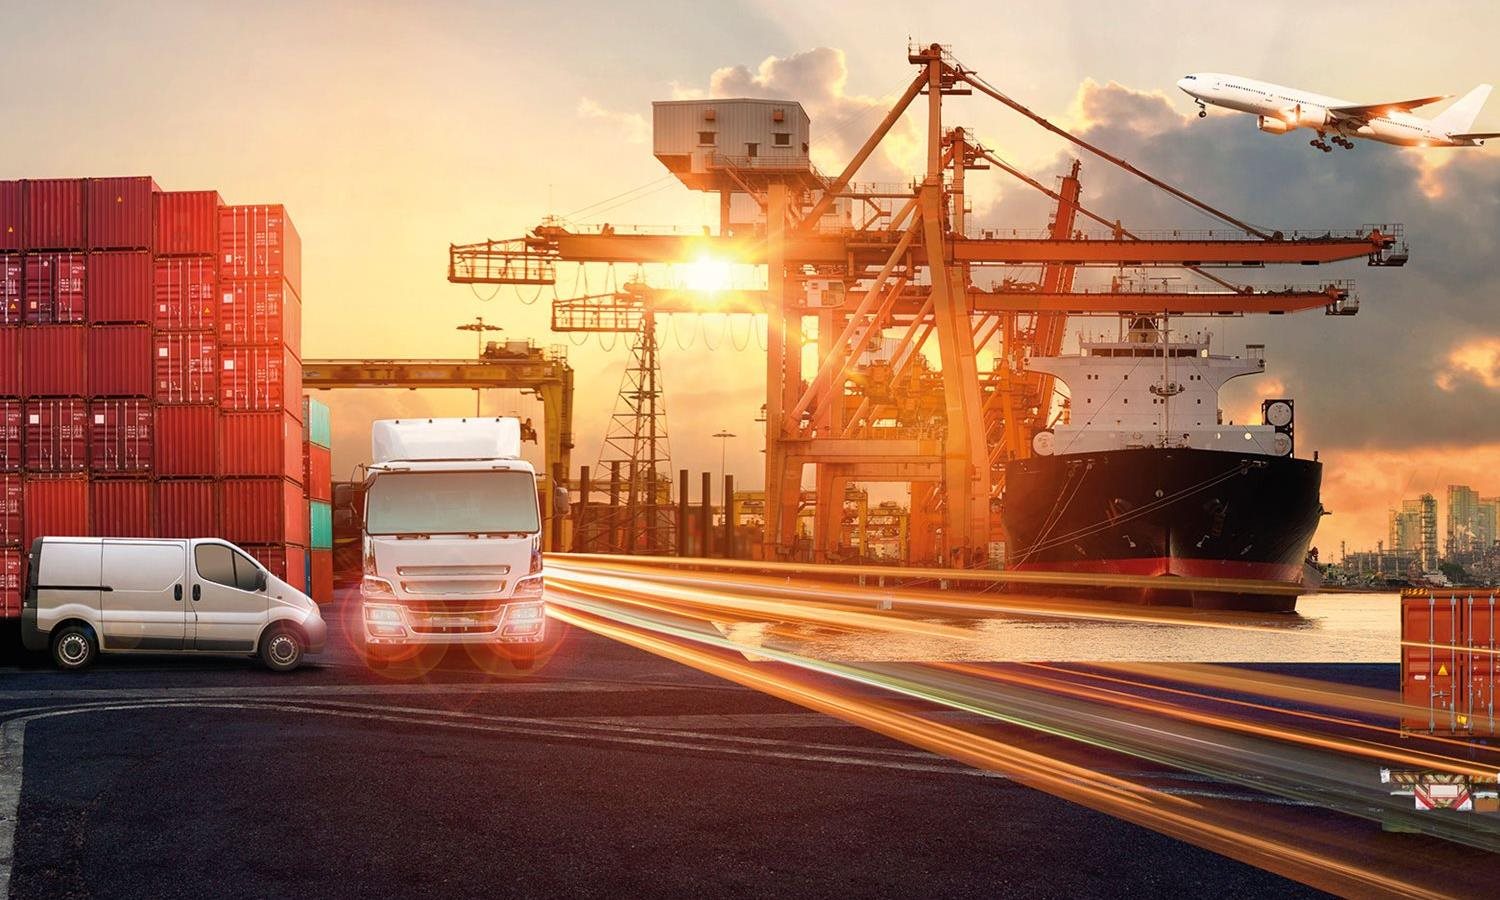 Future of Freight plan is a positive step forward, says Logistics UK 